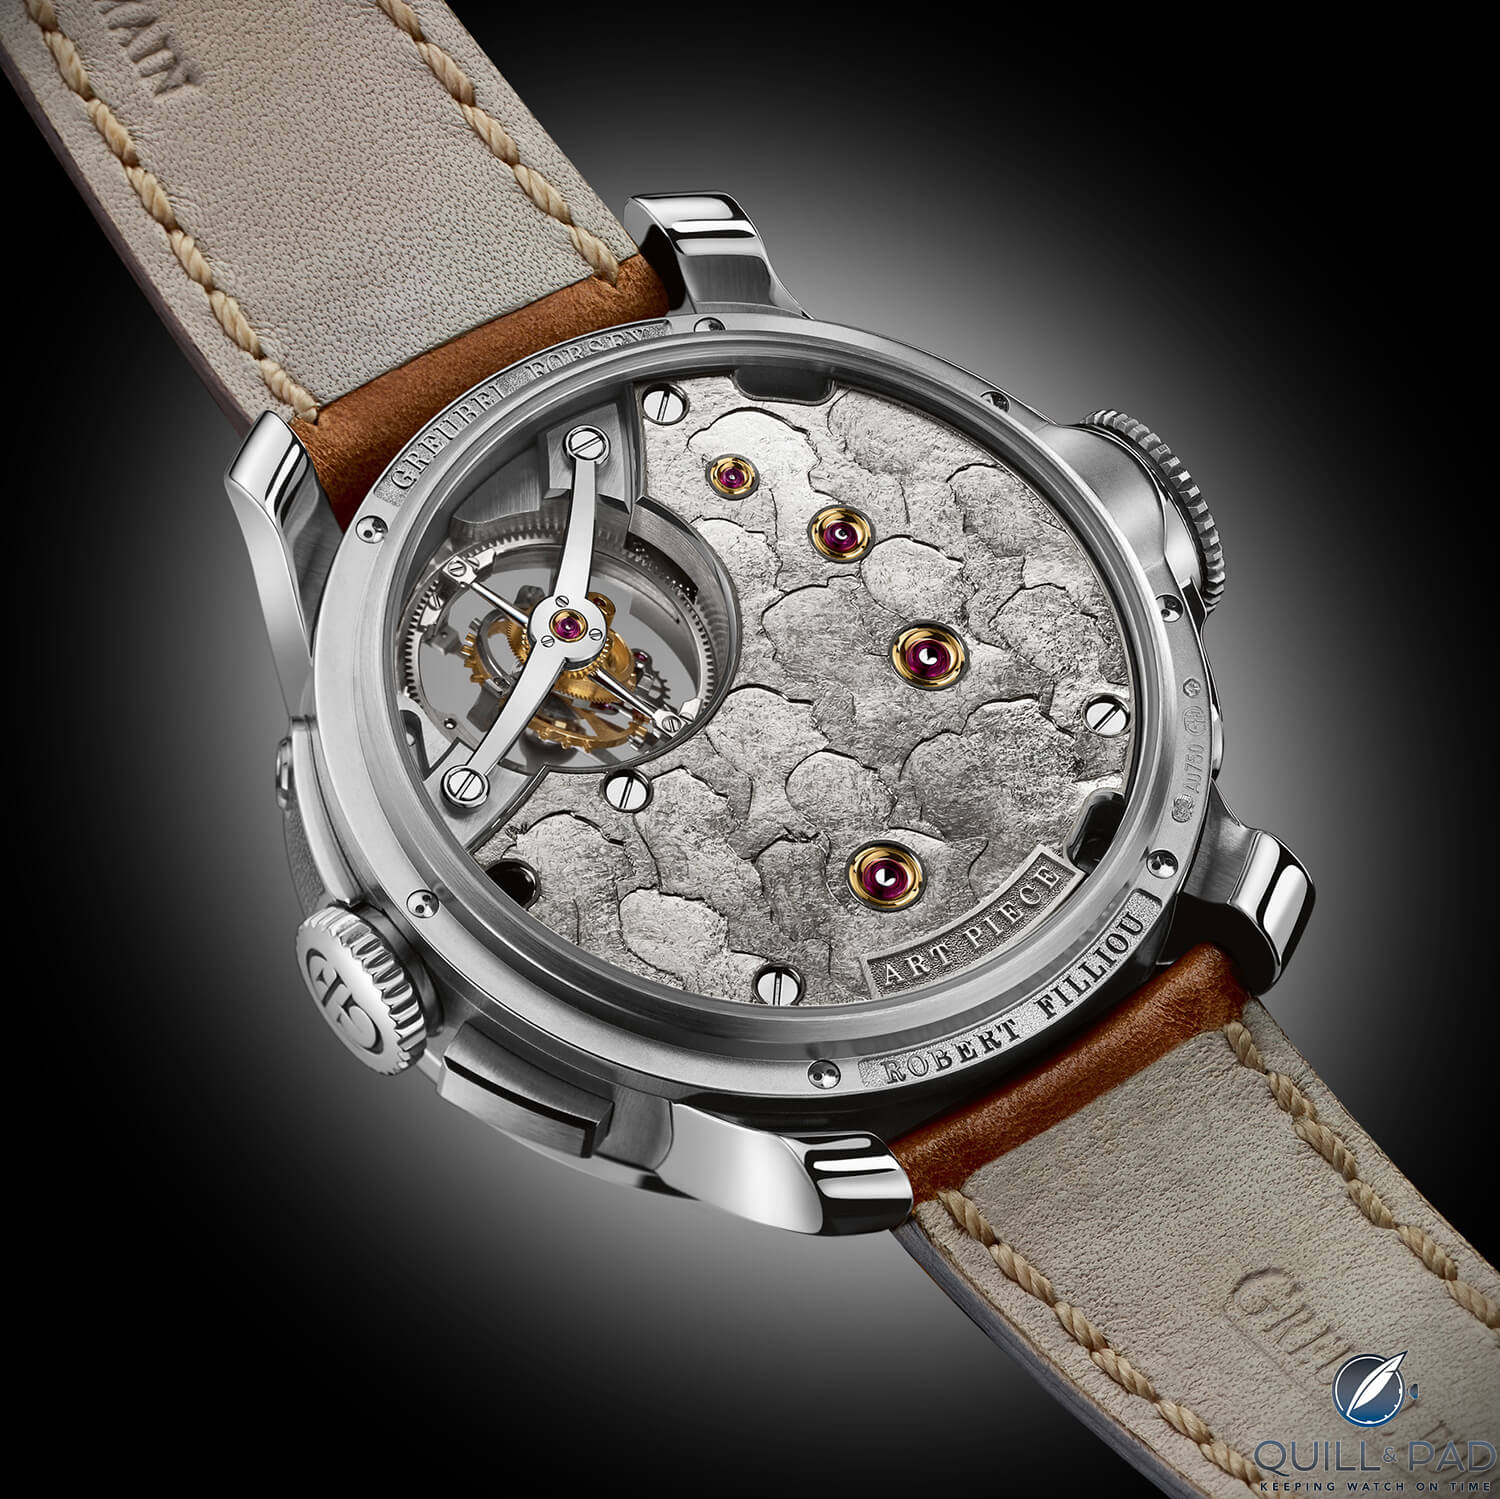 The back of the watch is decorated with profiles of those involved in the Greubel Forsey Art Piece 2 Edition 1 Filliou project, a reference to Filliou’s Couvre-Chef(s)-D’oeuvre(s), depicting a bowler hat containing the works of 14 artists